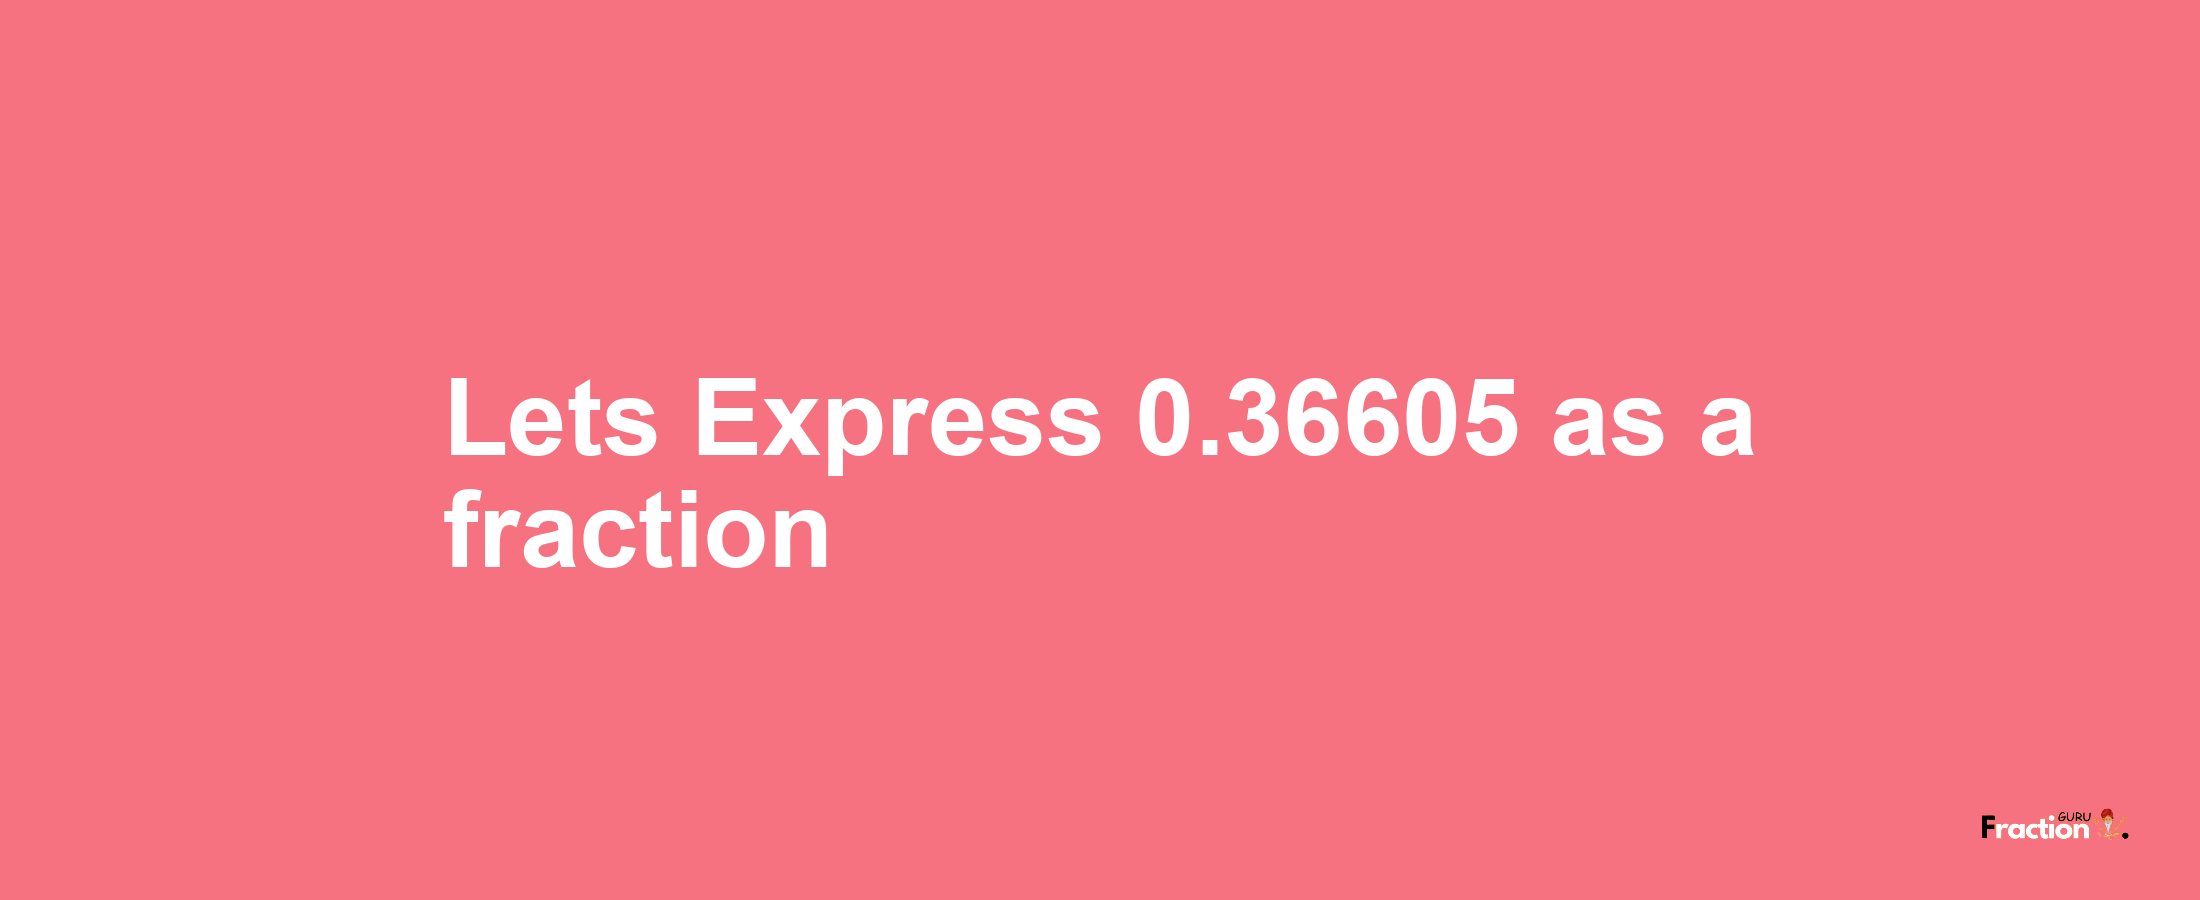 Lets Express 0.36605 as afraction